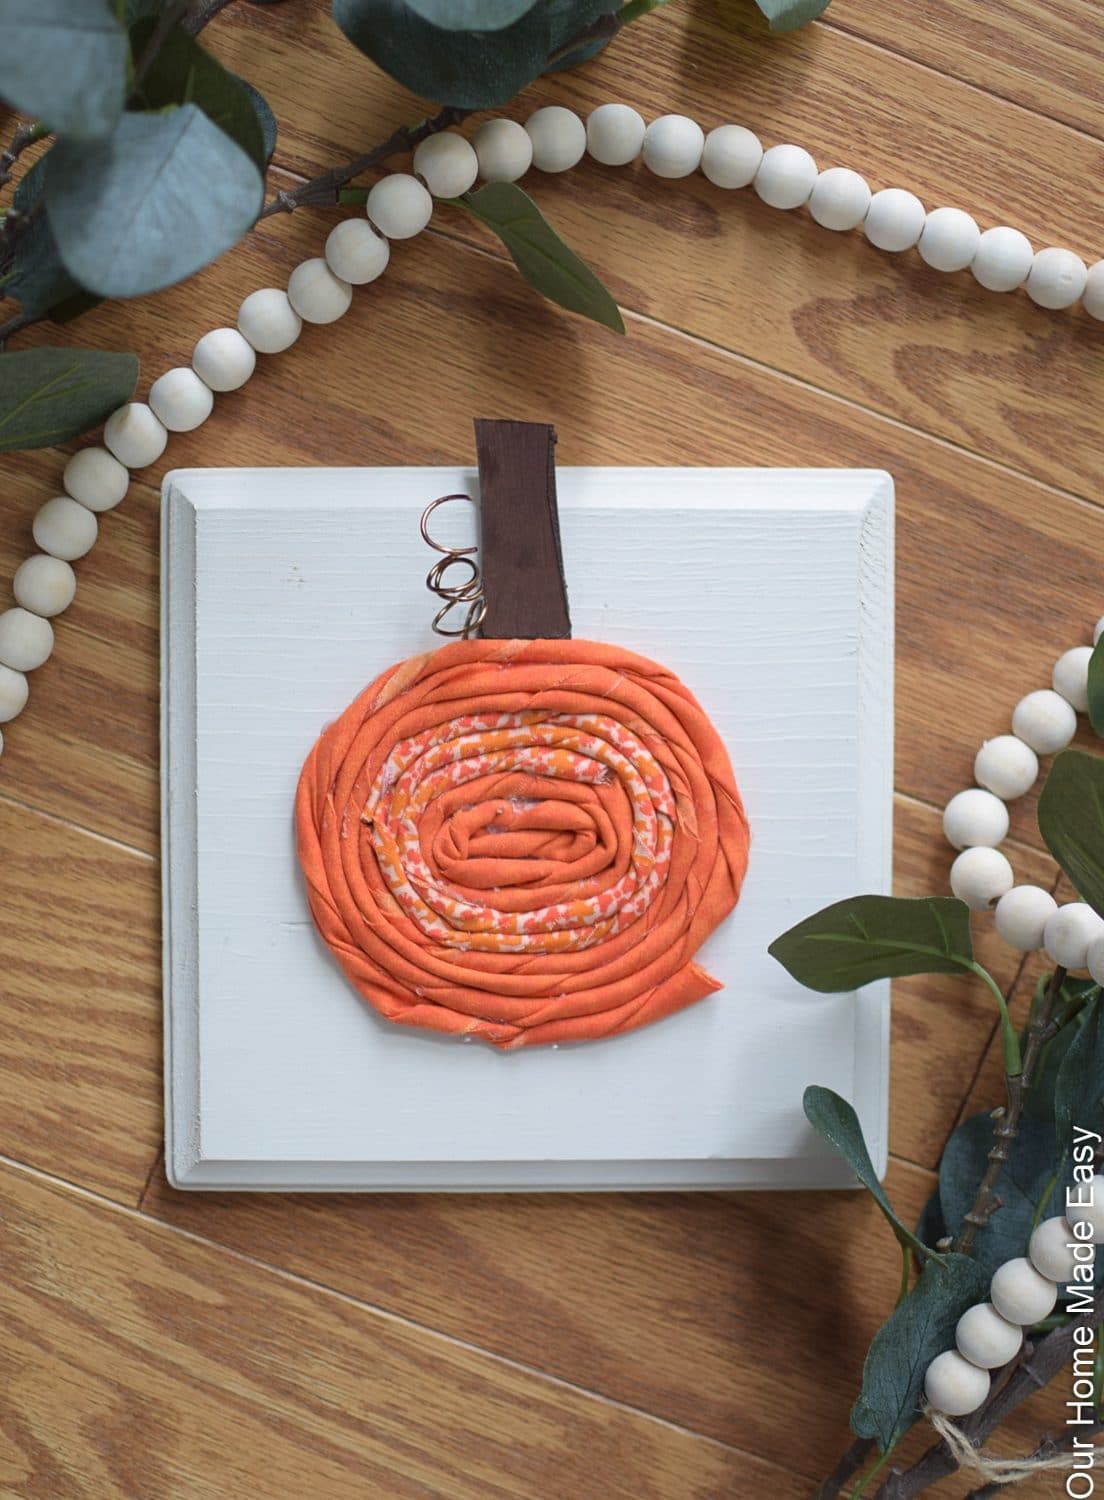 Making these cute fabric pumpkins is a fun way to add DIY fall decor to your home